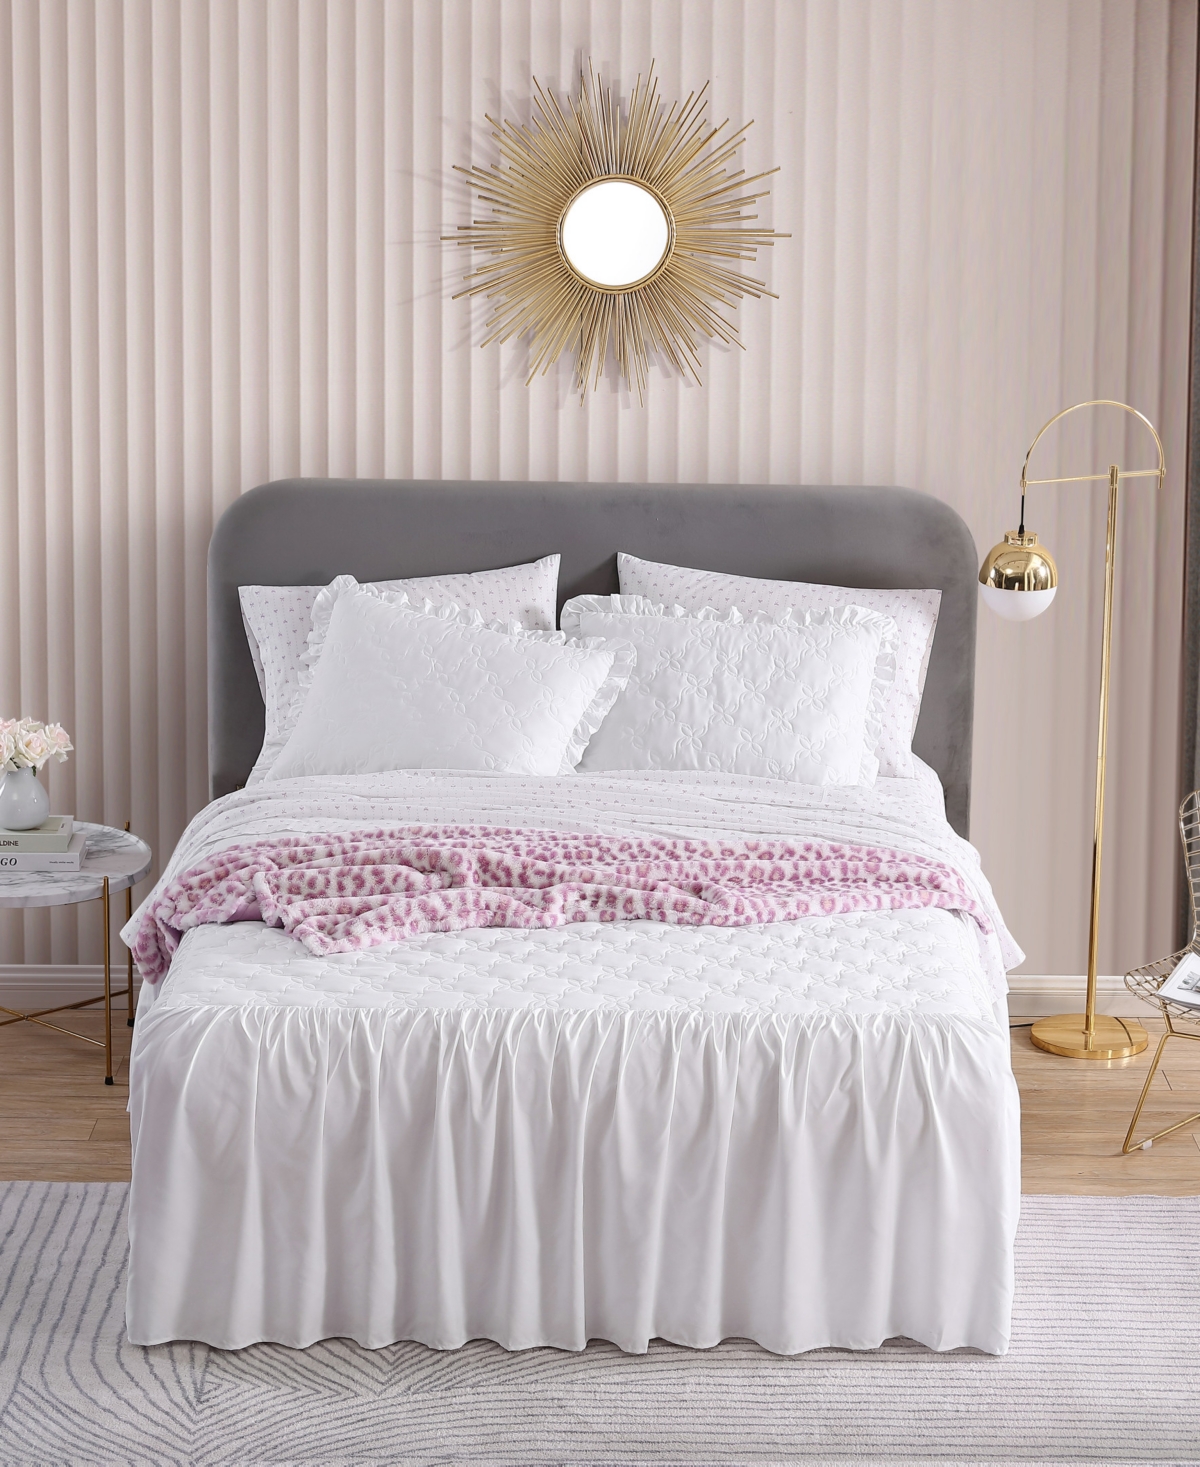 Betsey Johnson 3 Piece Solid Microfiber Bedspread Set, King Bedding In White